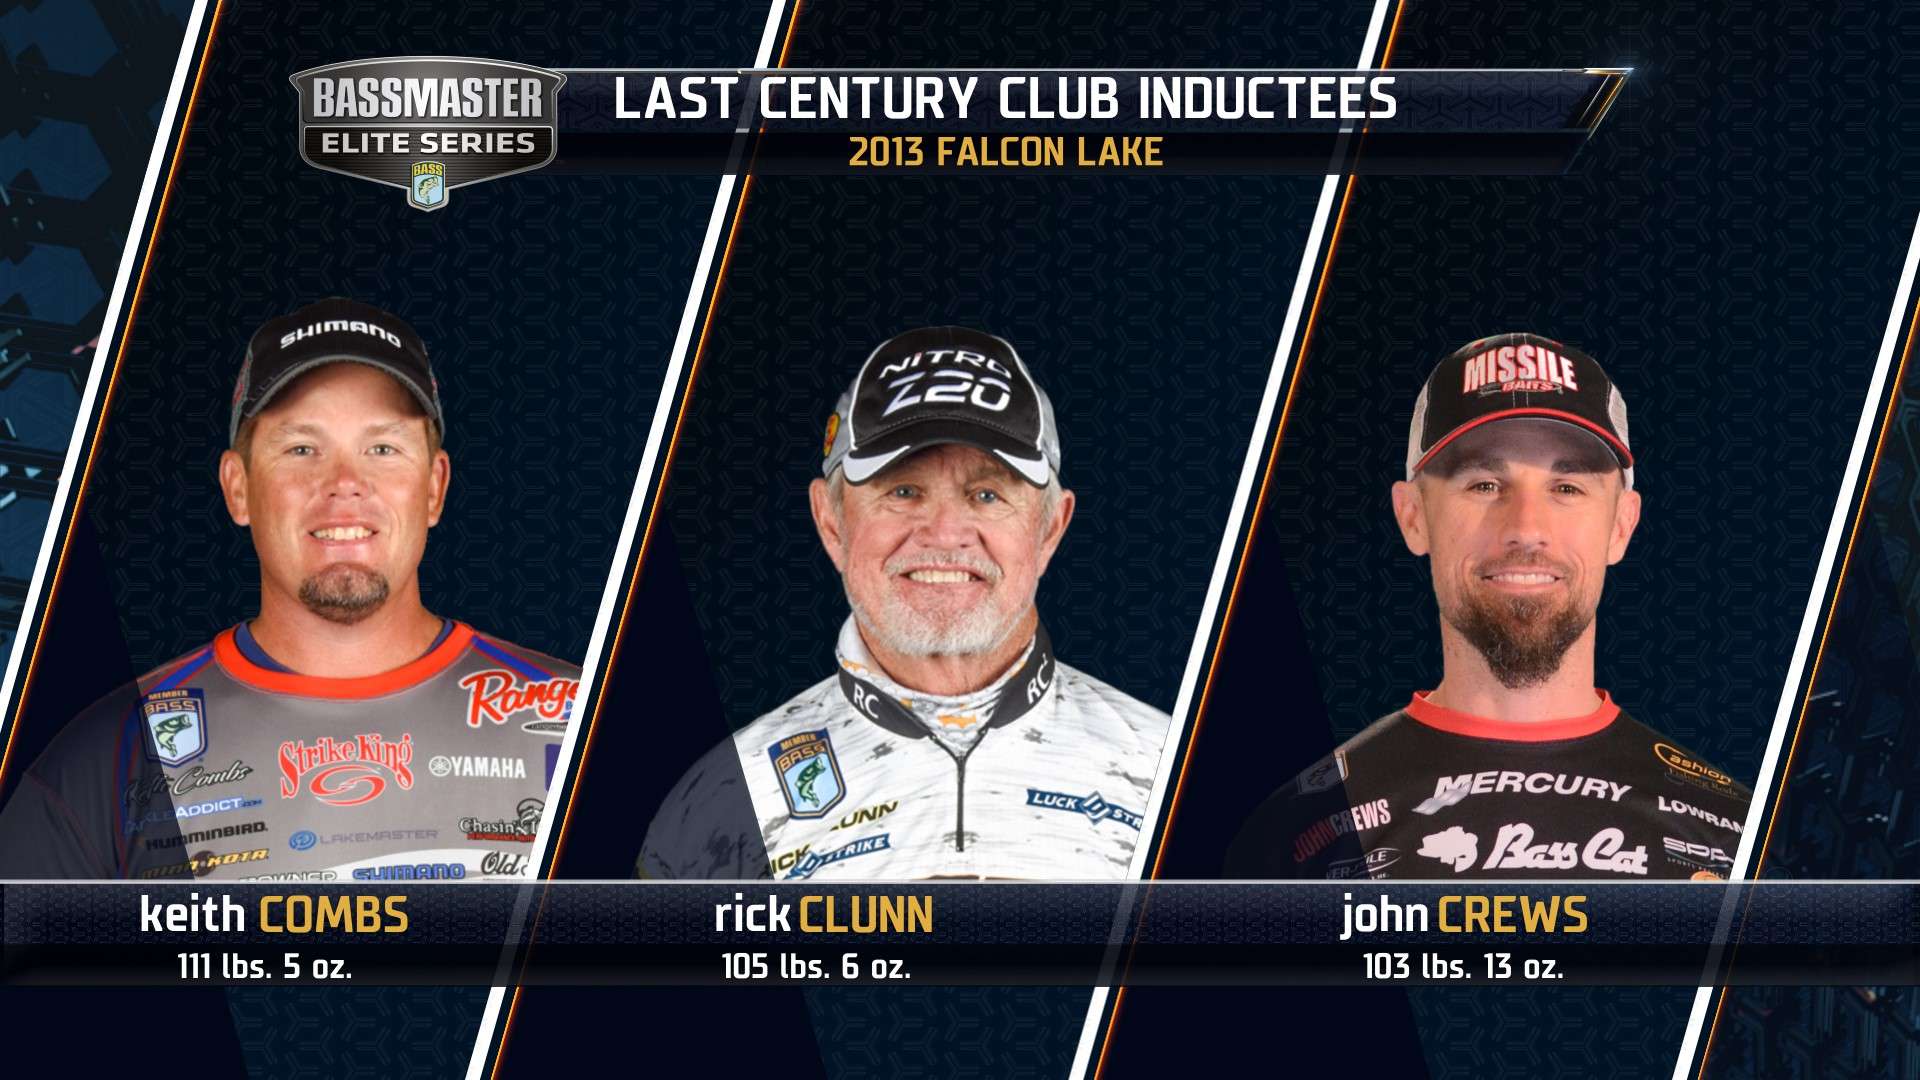 The Bassmaster Elite Series hasn't broken the Century Club since 2013 at Falcon Lake when Keith Combs, Rick Clunn and John Crews broke that barrier. At the St. Johns River, four anglers broke 90 pounds and Clunn was only 1-2 off of the 100-pound mark.